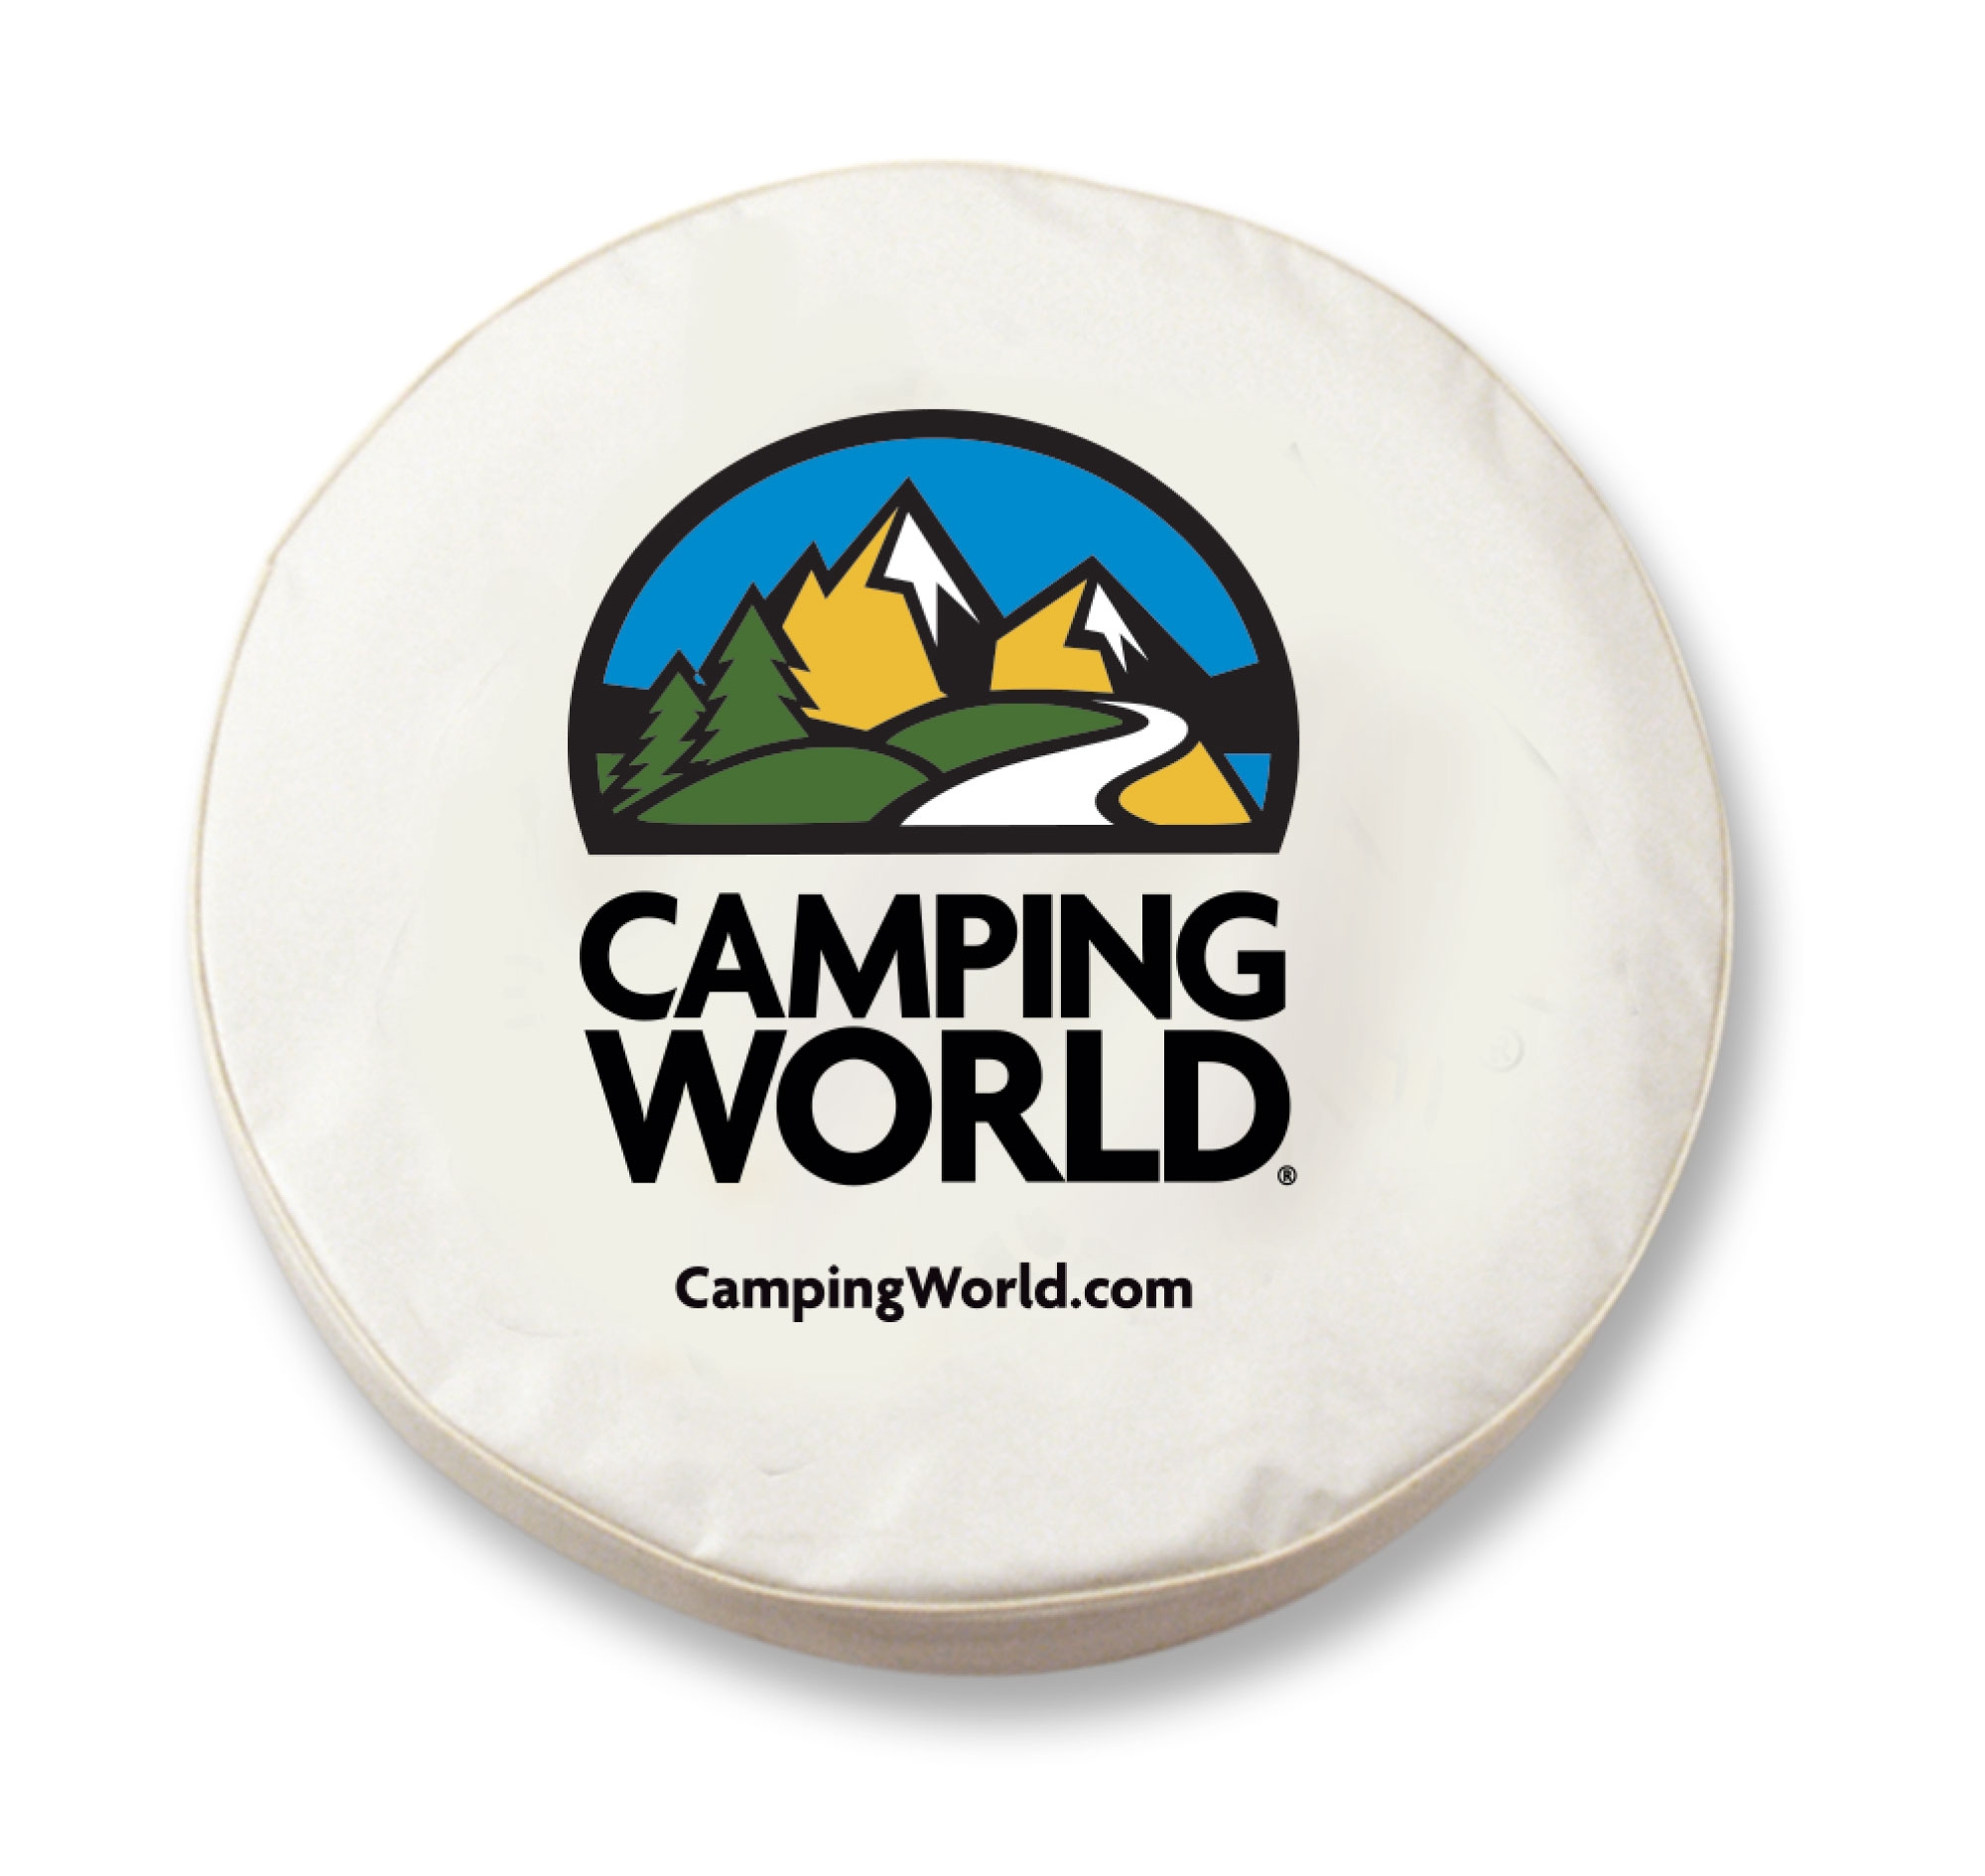 Camping World Dealer Imprint Tire Cover